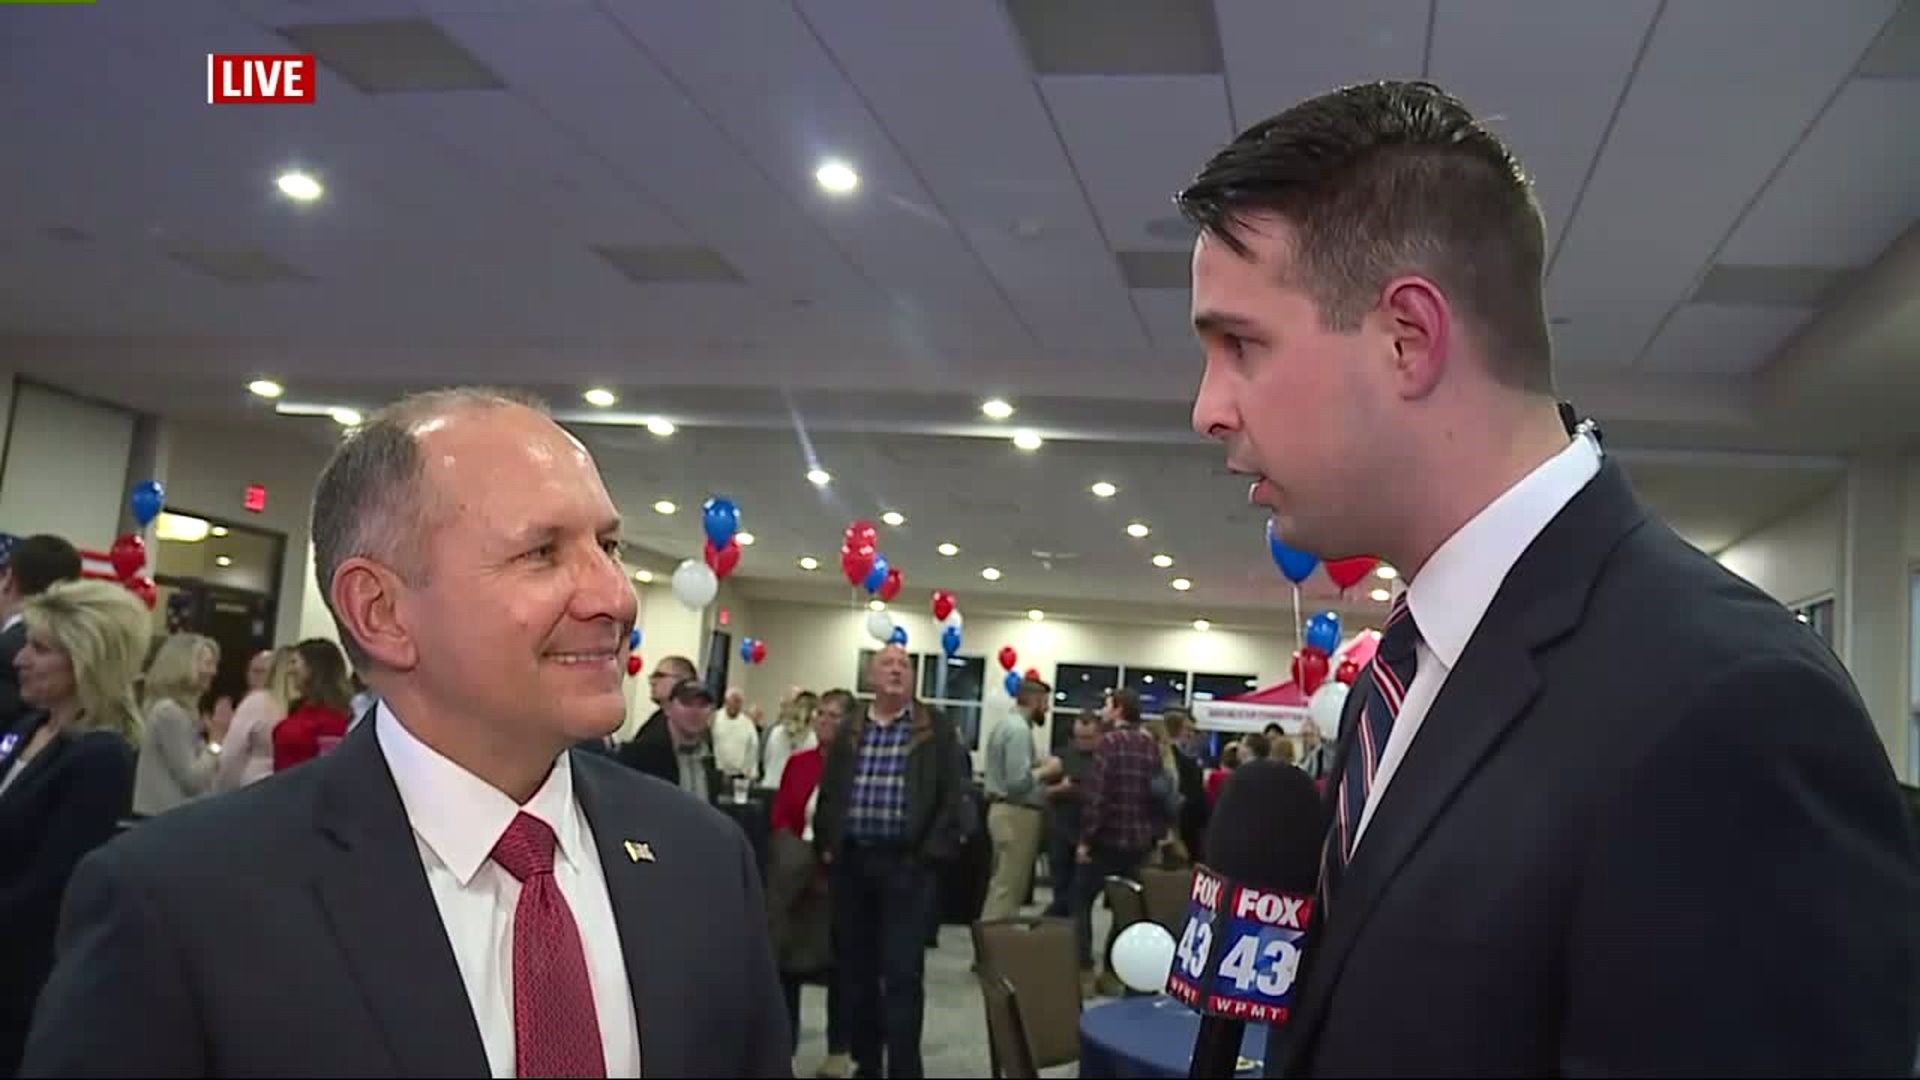 Lloyd Smucker talks about his re-election